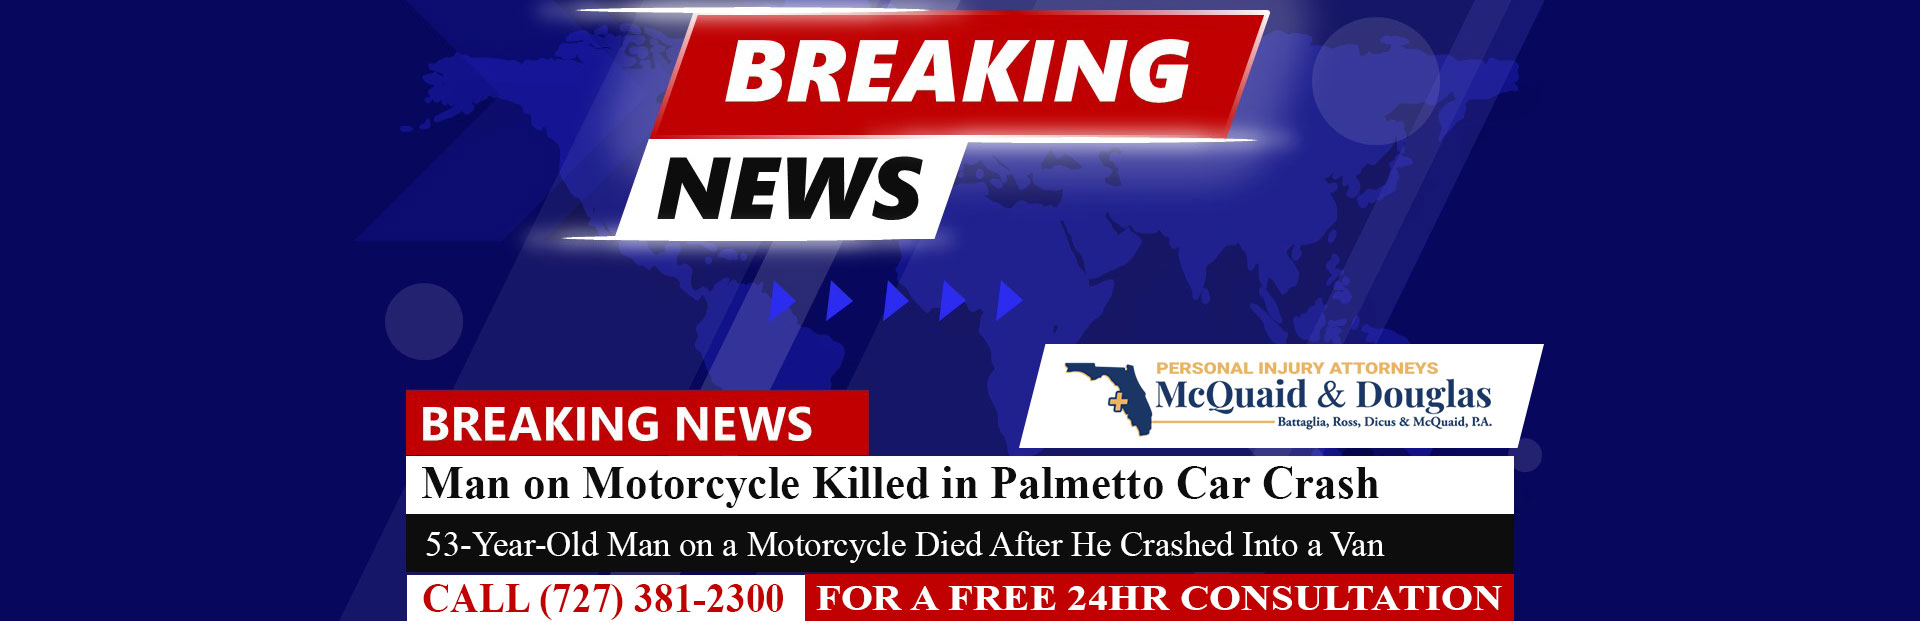 [6-13-22] Man on Motorcycle Killed in Palmetto Car Crash, Troopers Say